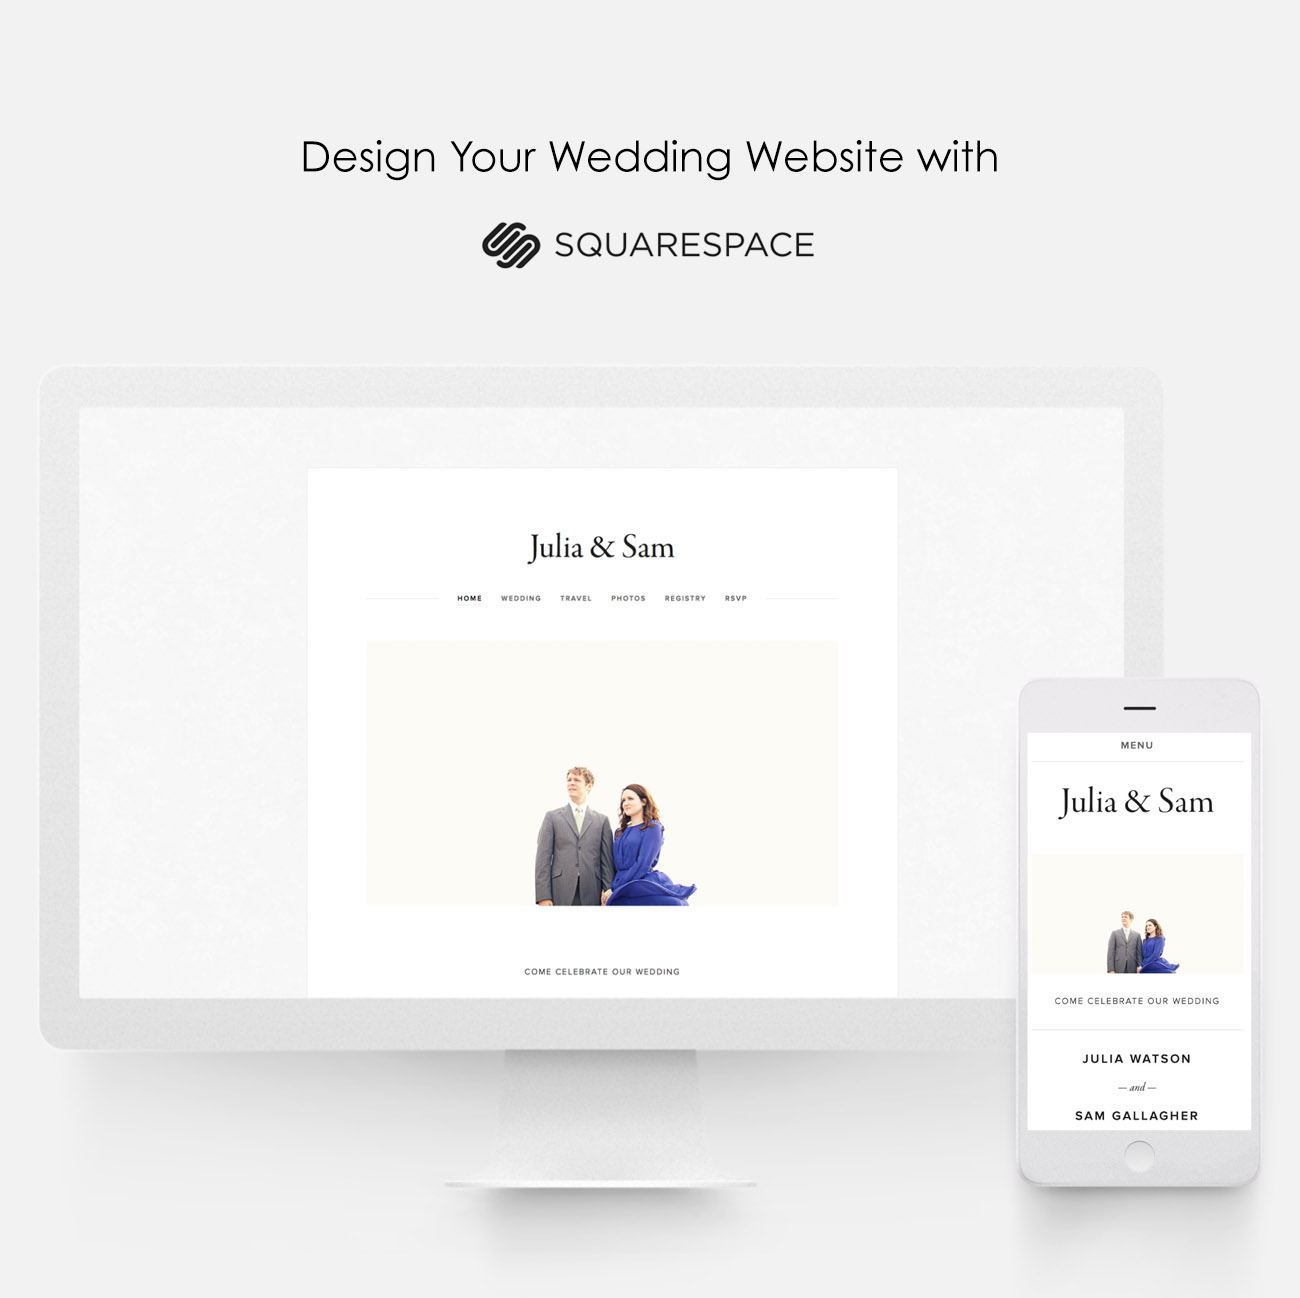 Squarespace for your wedding website